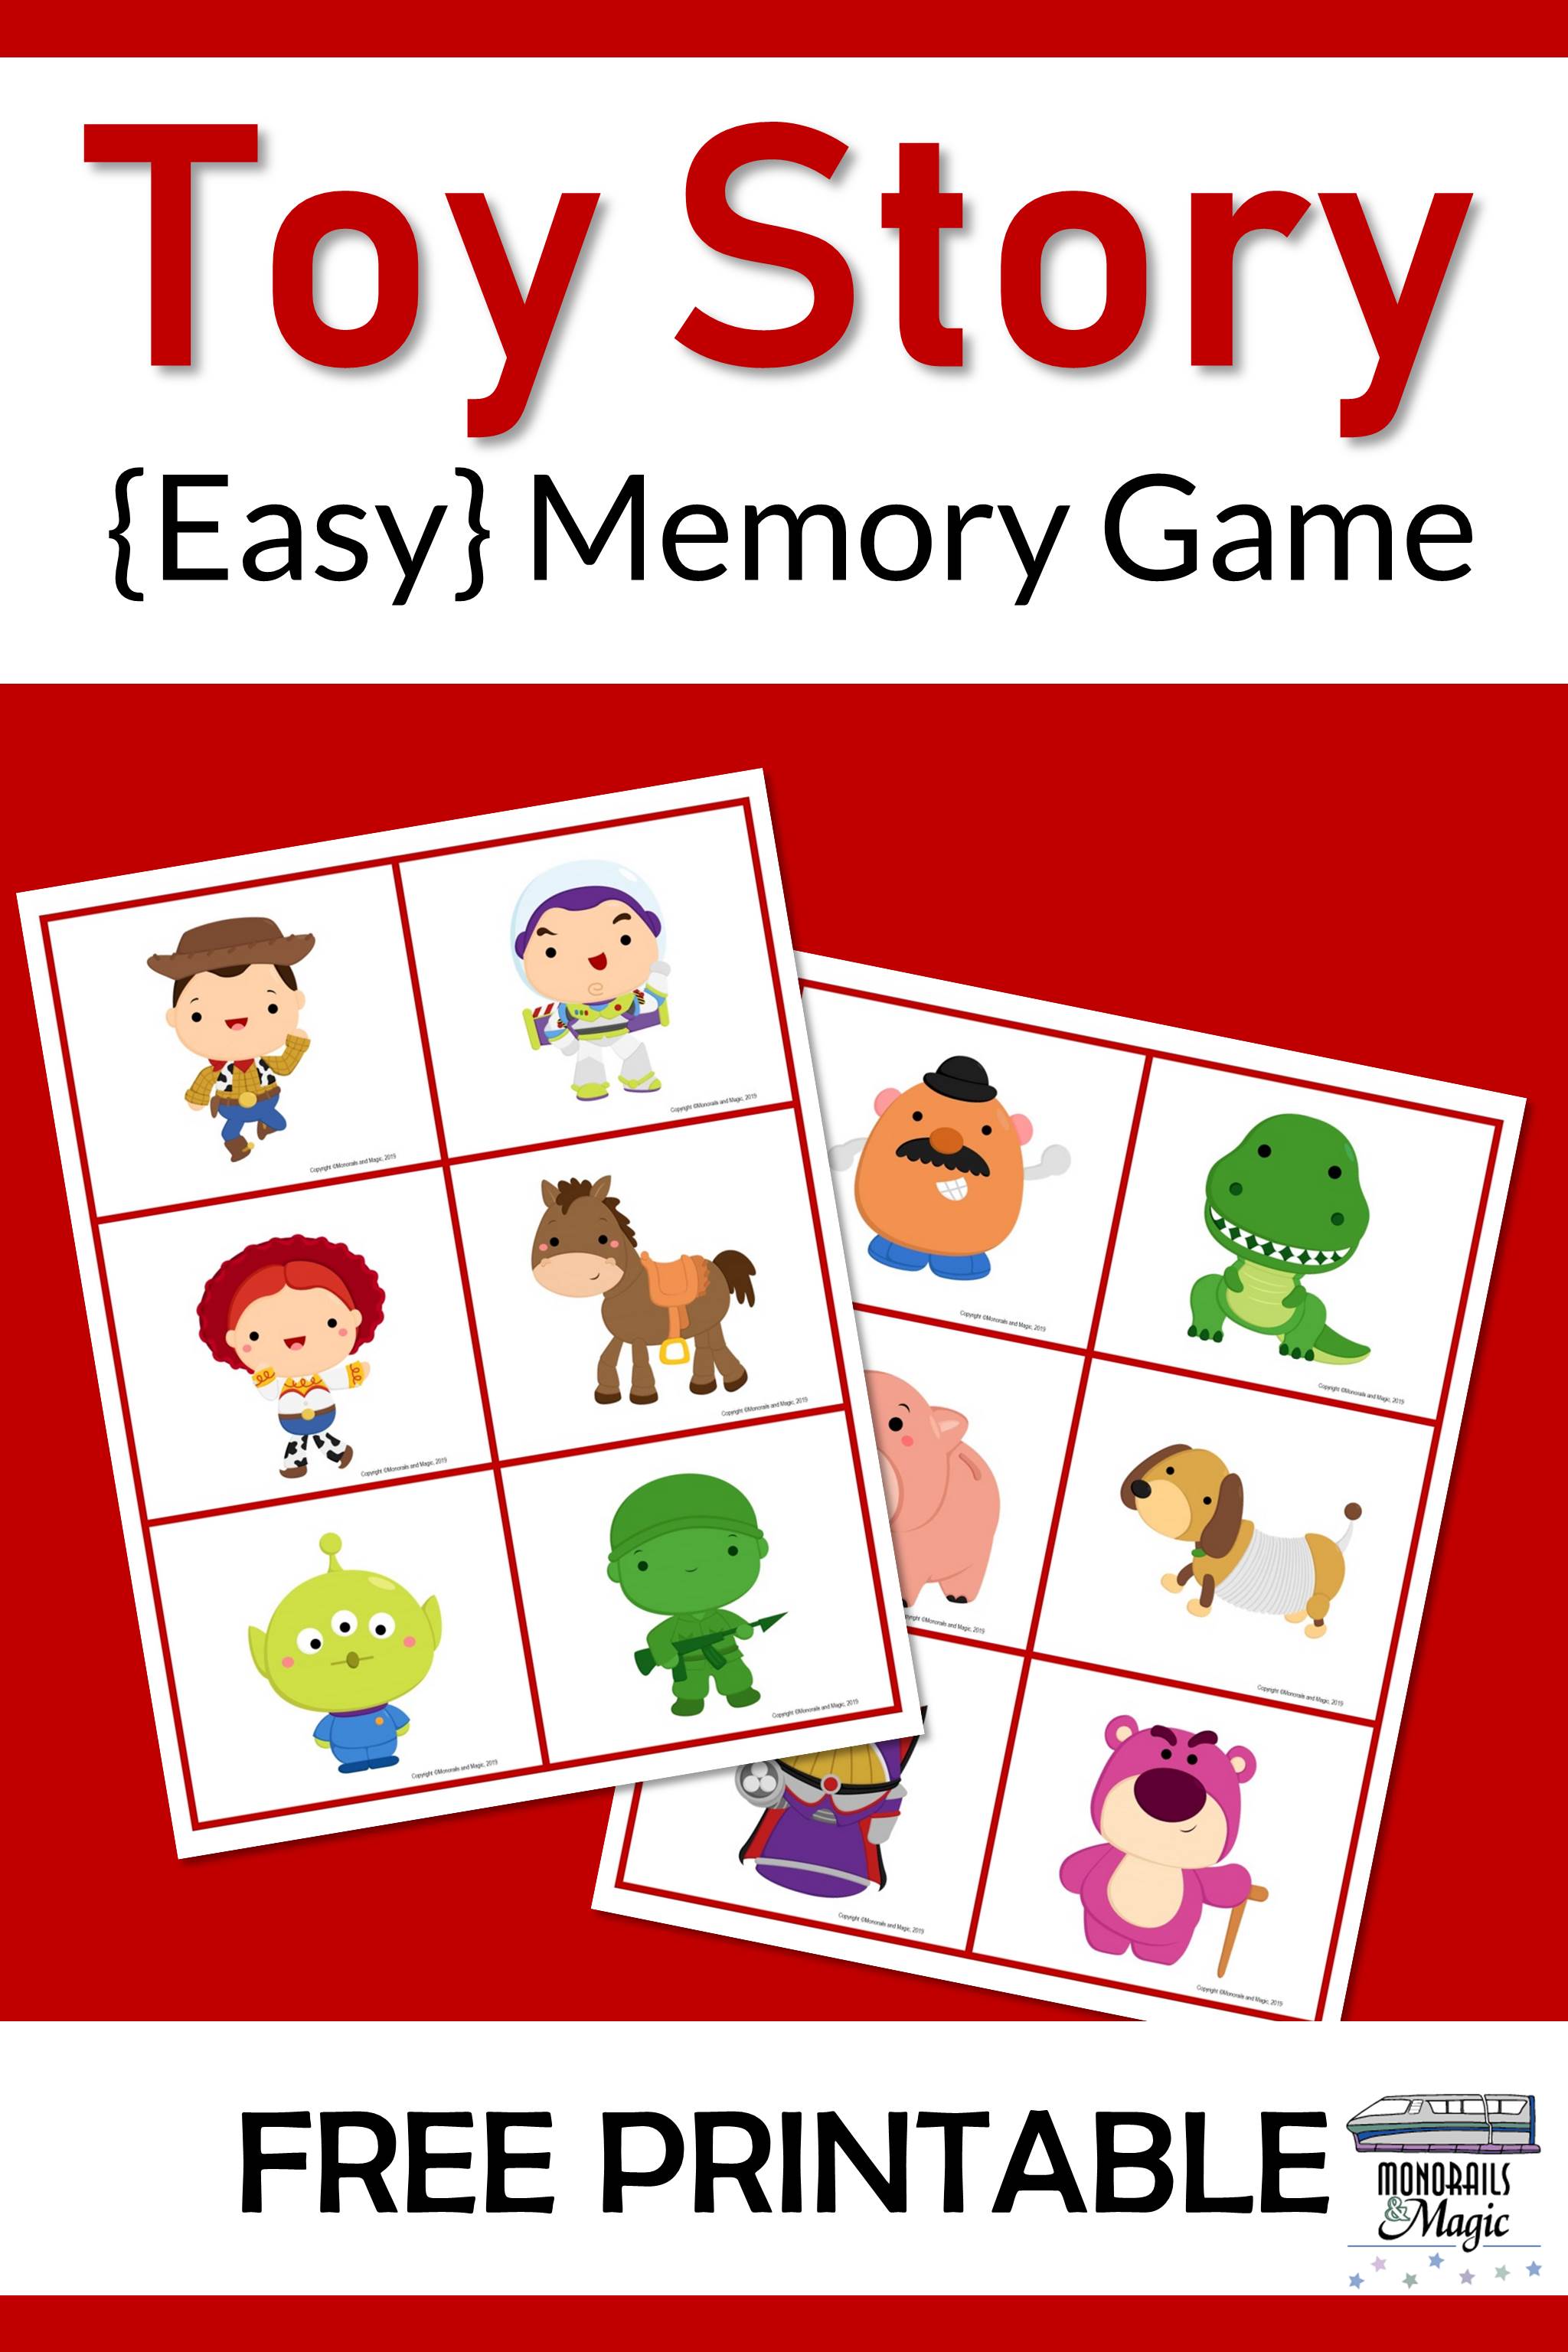 toy story memory game free printable monorails and magic